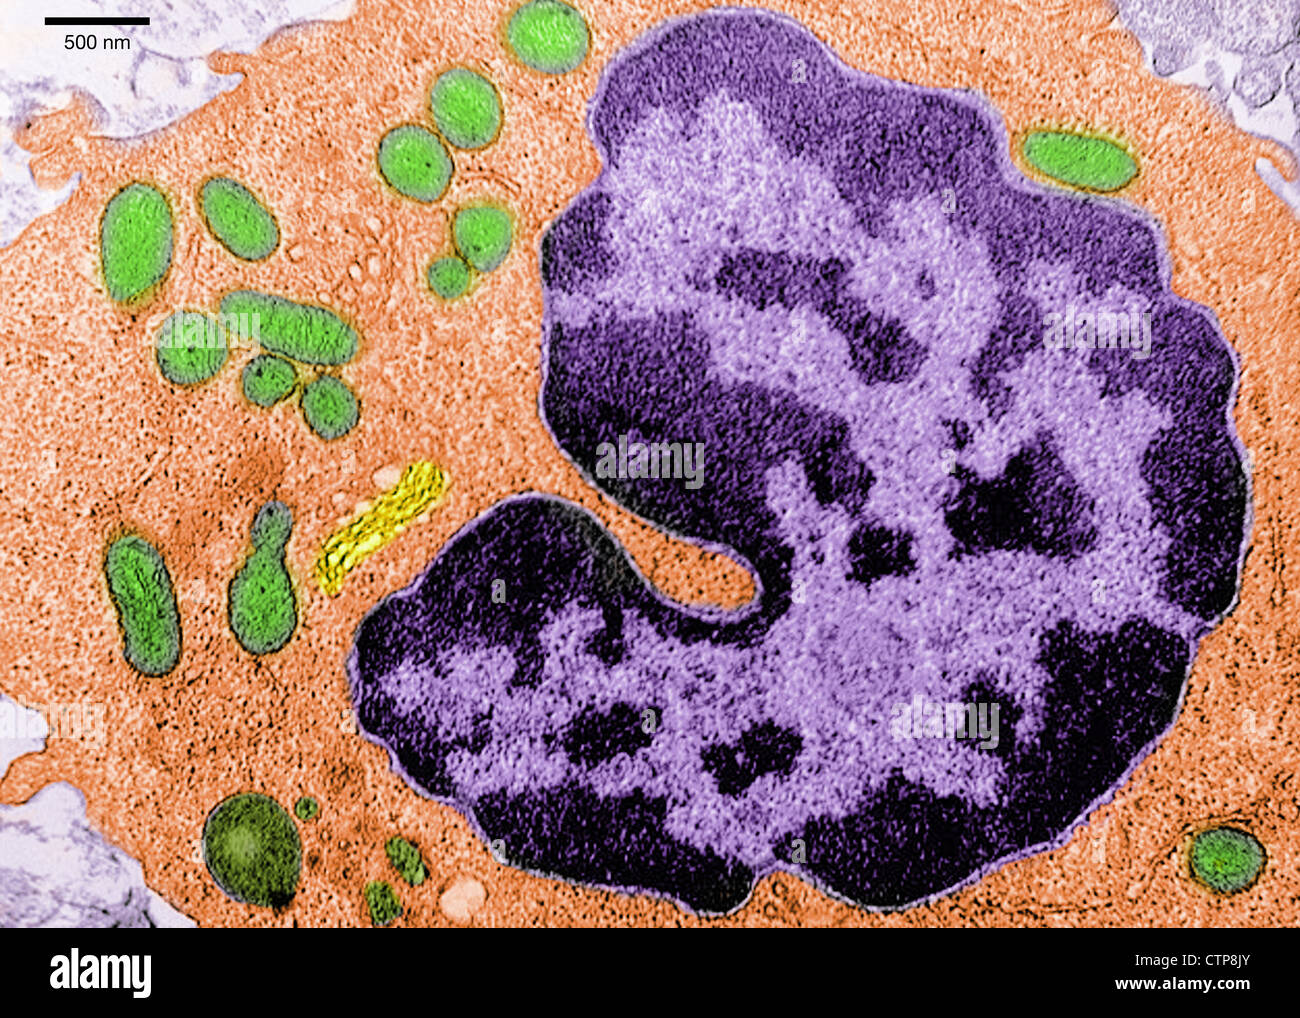 Transmission electron microscope image of mammalian lung tissue showing a macrophage in the alveolus. Stock Photo